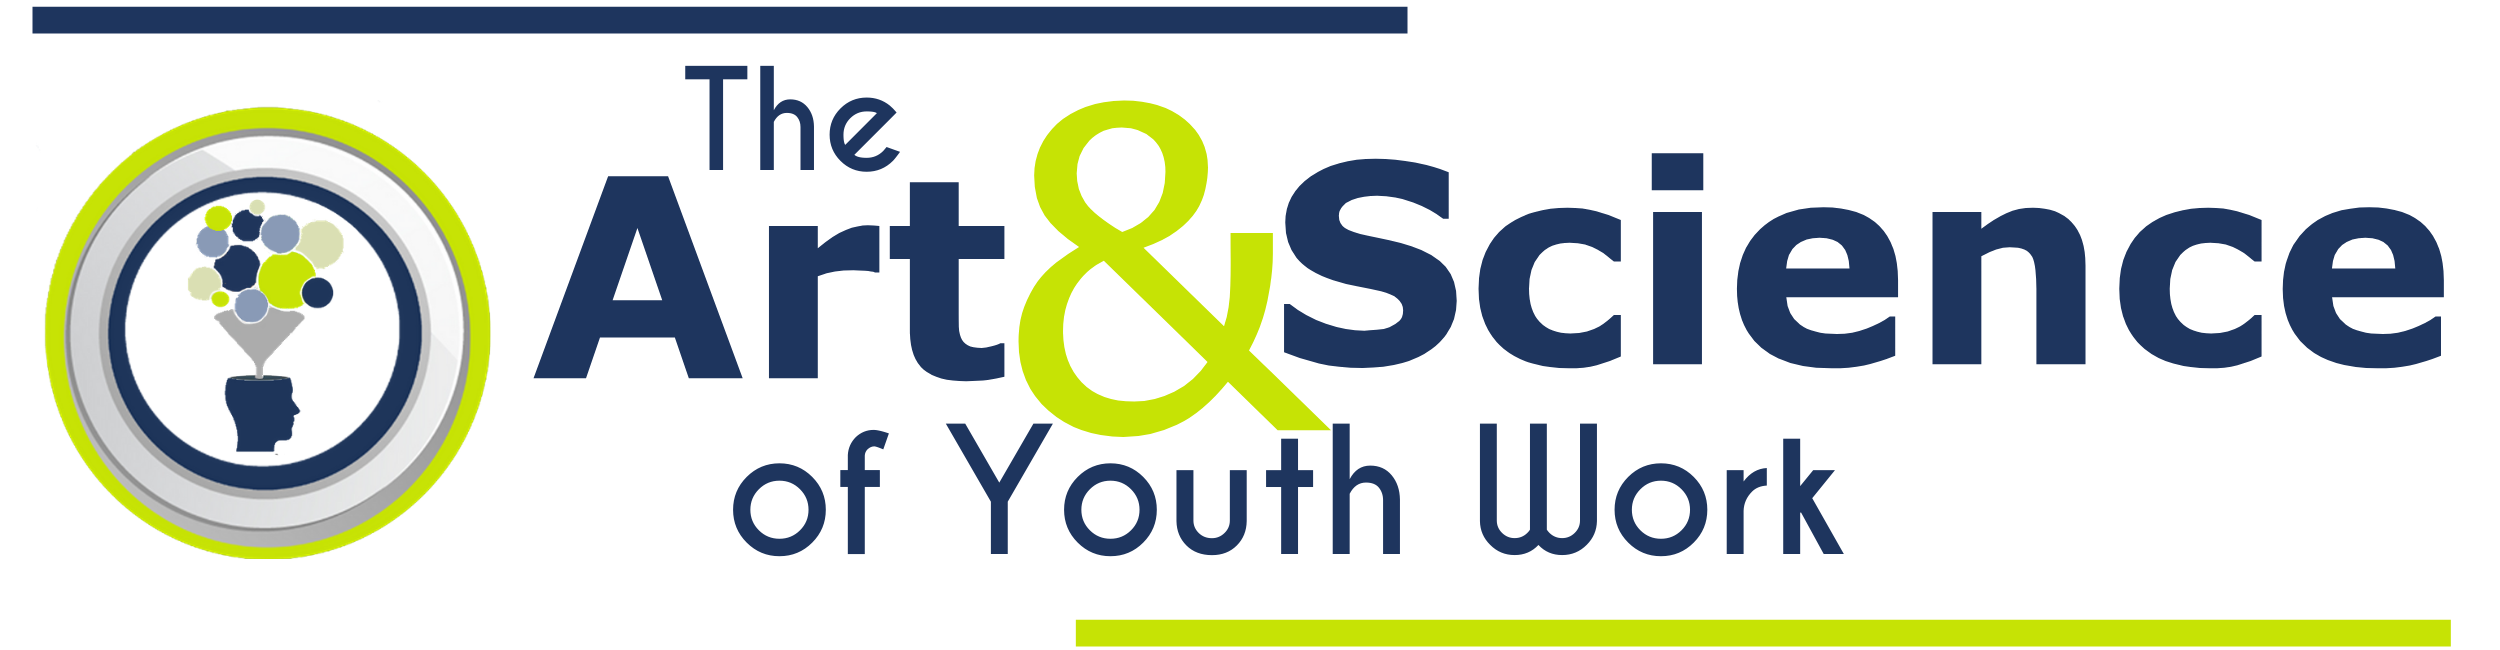 The Art and Science of youth work logo